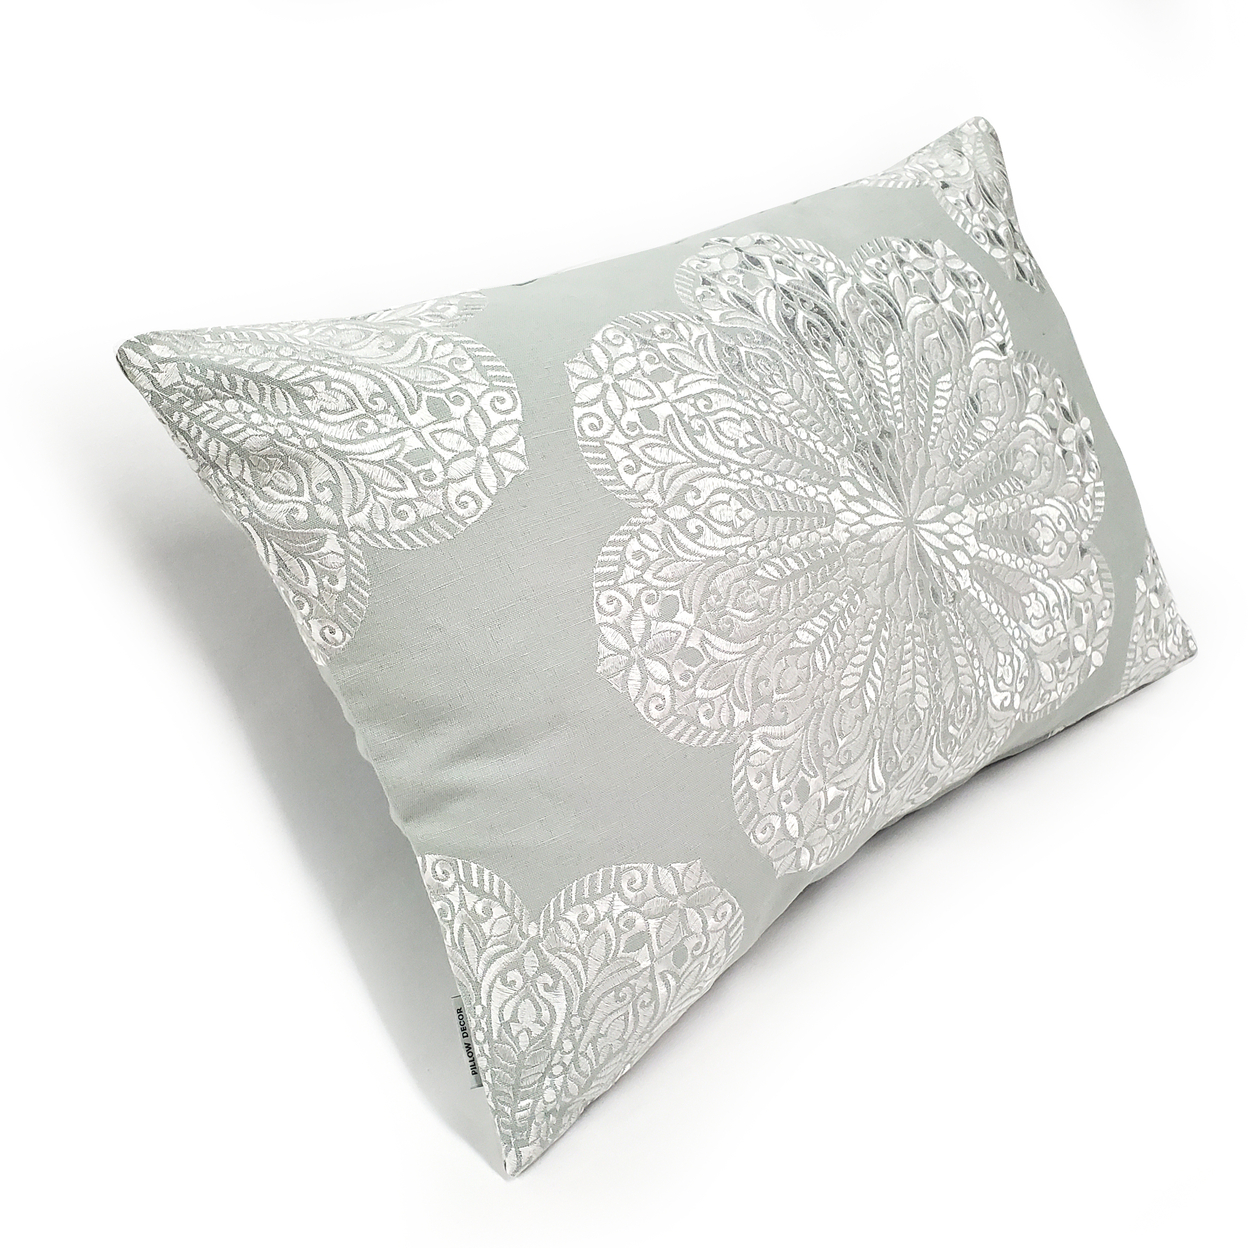 Mancini Blue Slate And Sliver Medallion Embroidered Throw Pillow 16x24, With Polyfill Insert